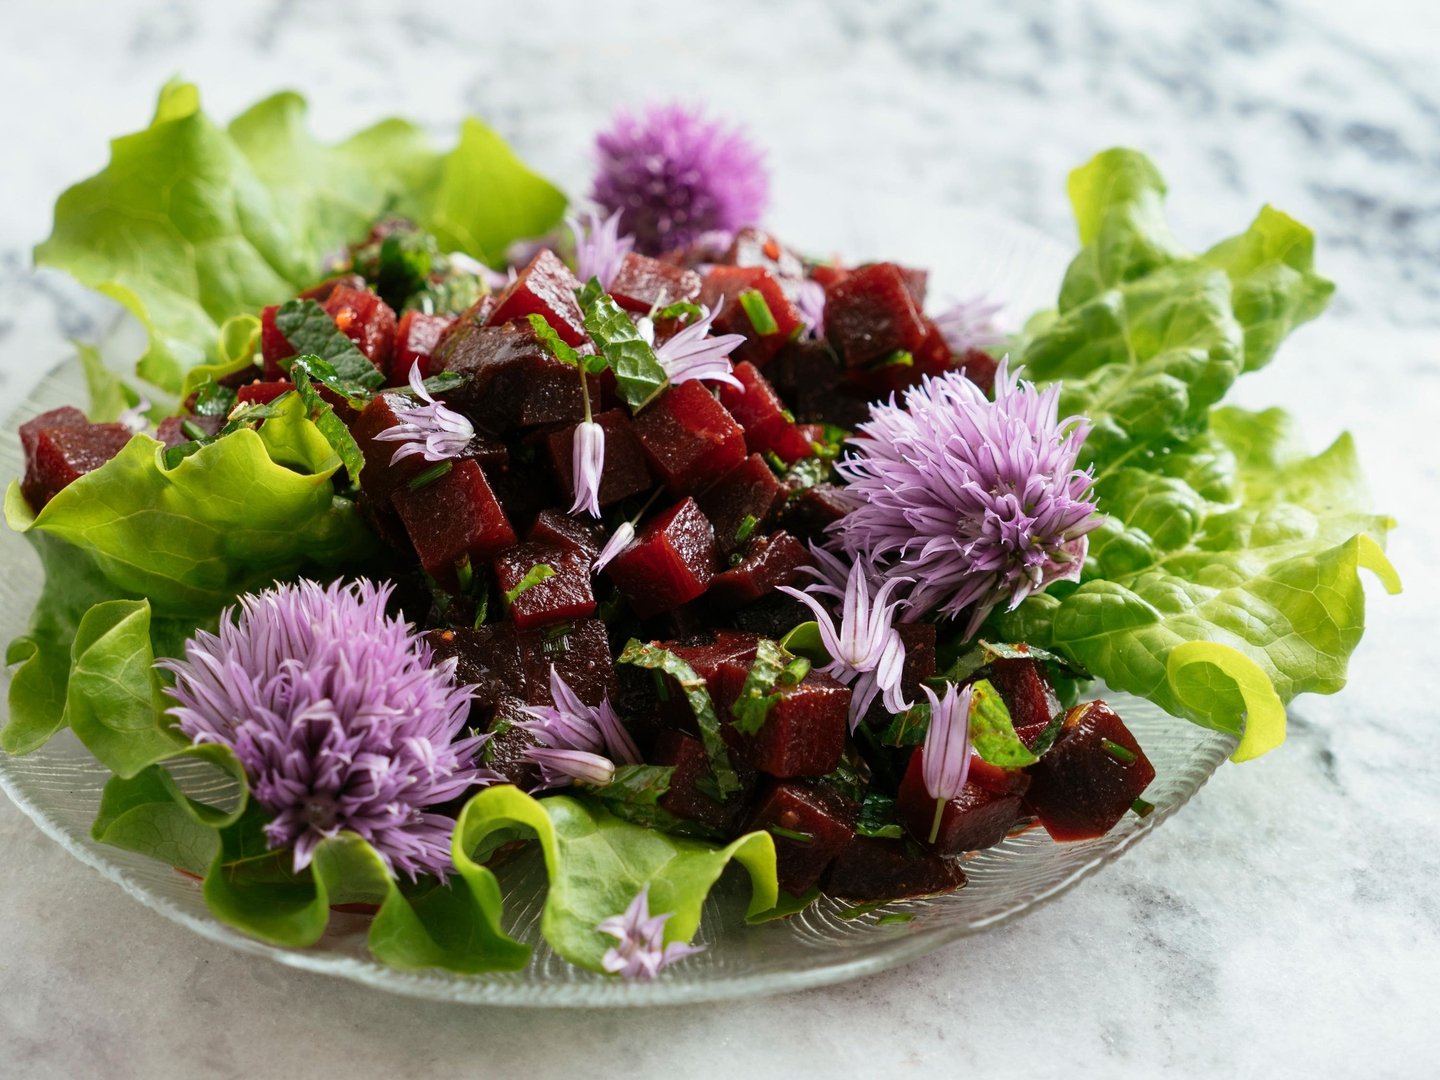 Add edible flowers to your cooking - The Concord Insider